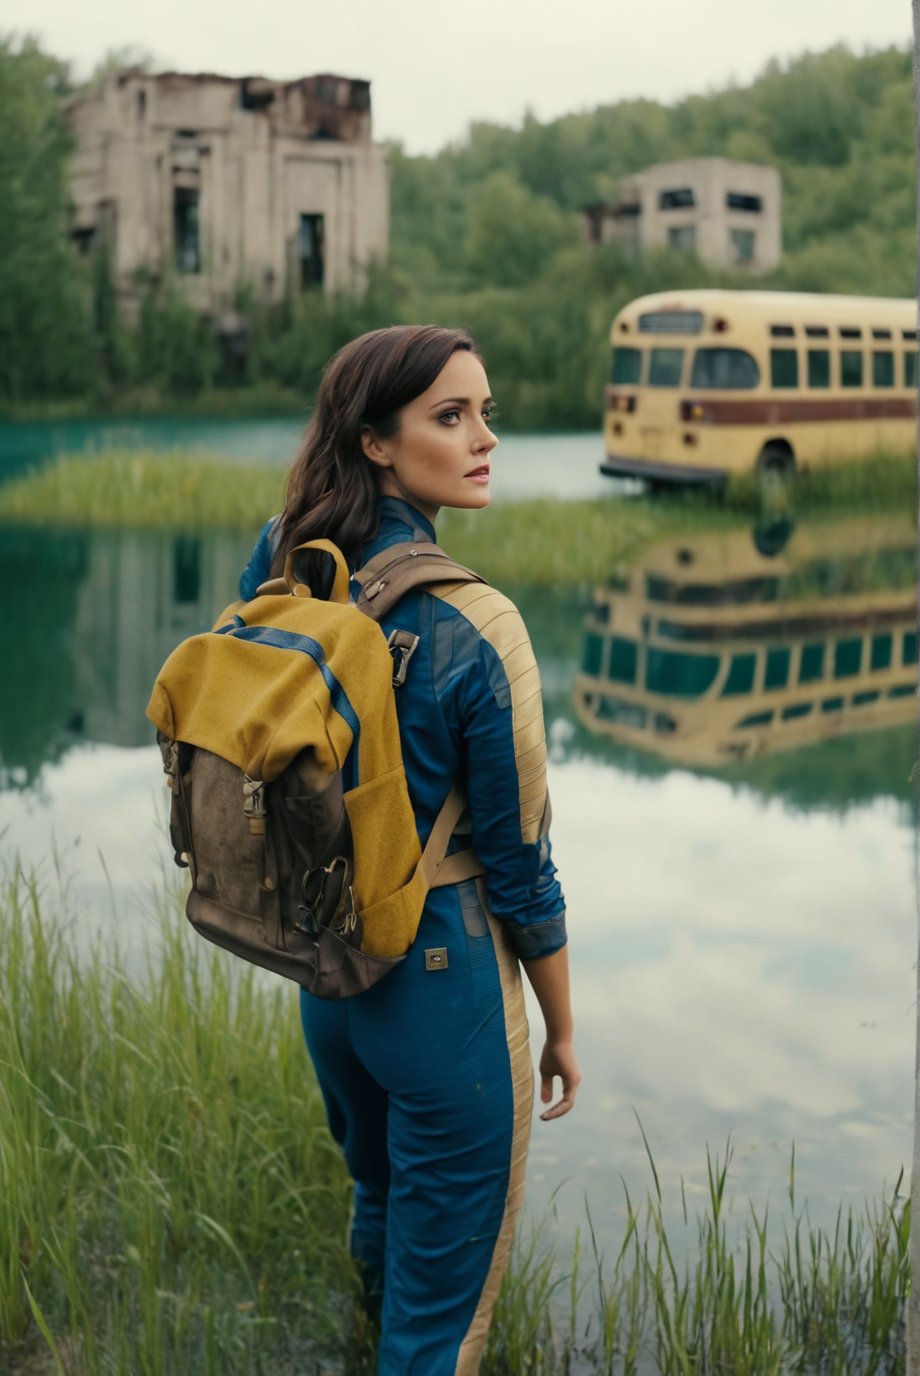 falloutcinematic, Lucy MacLean, vault dweller jumpsuit, fawn, grass, at edge of lake, flooded building exteriors, abandoned bus, outdoors, backpack, , ground vehicle, realistic